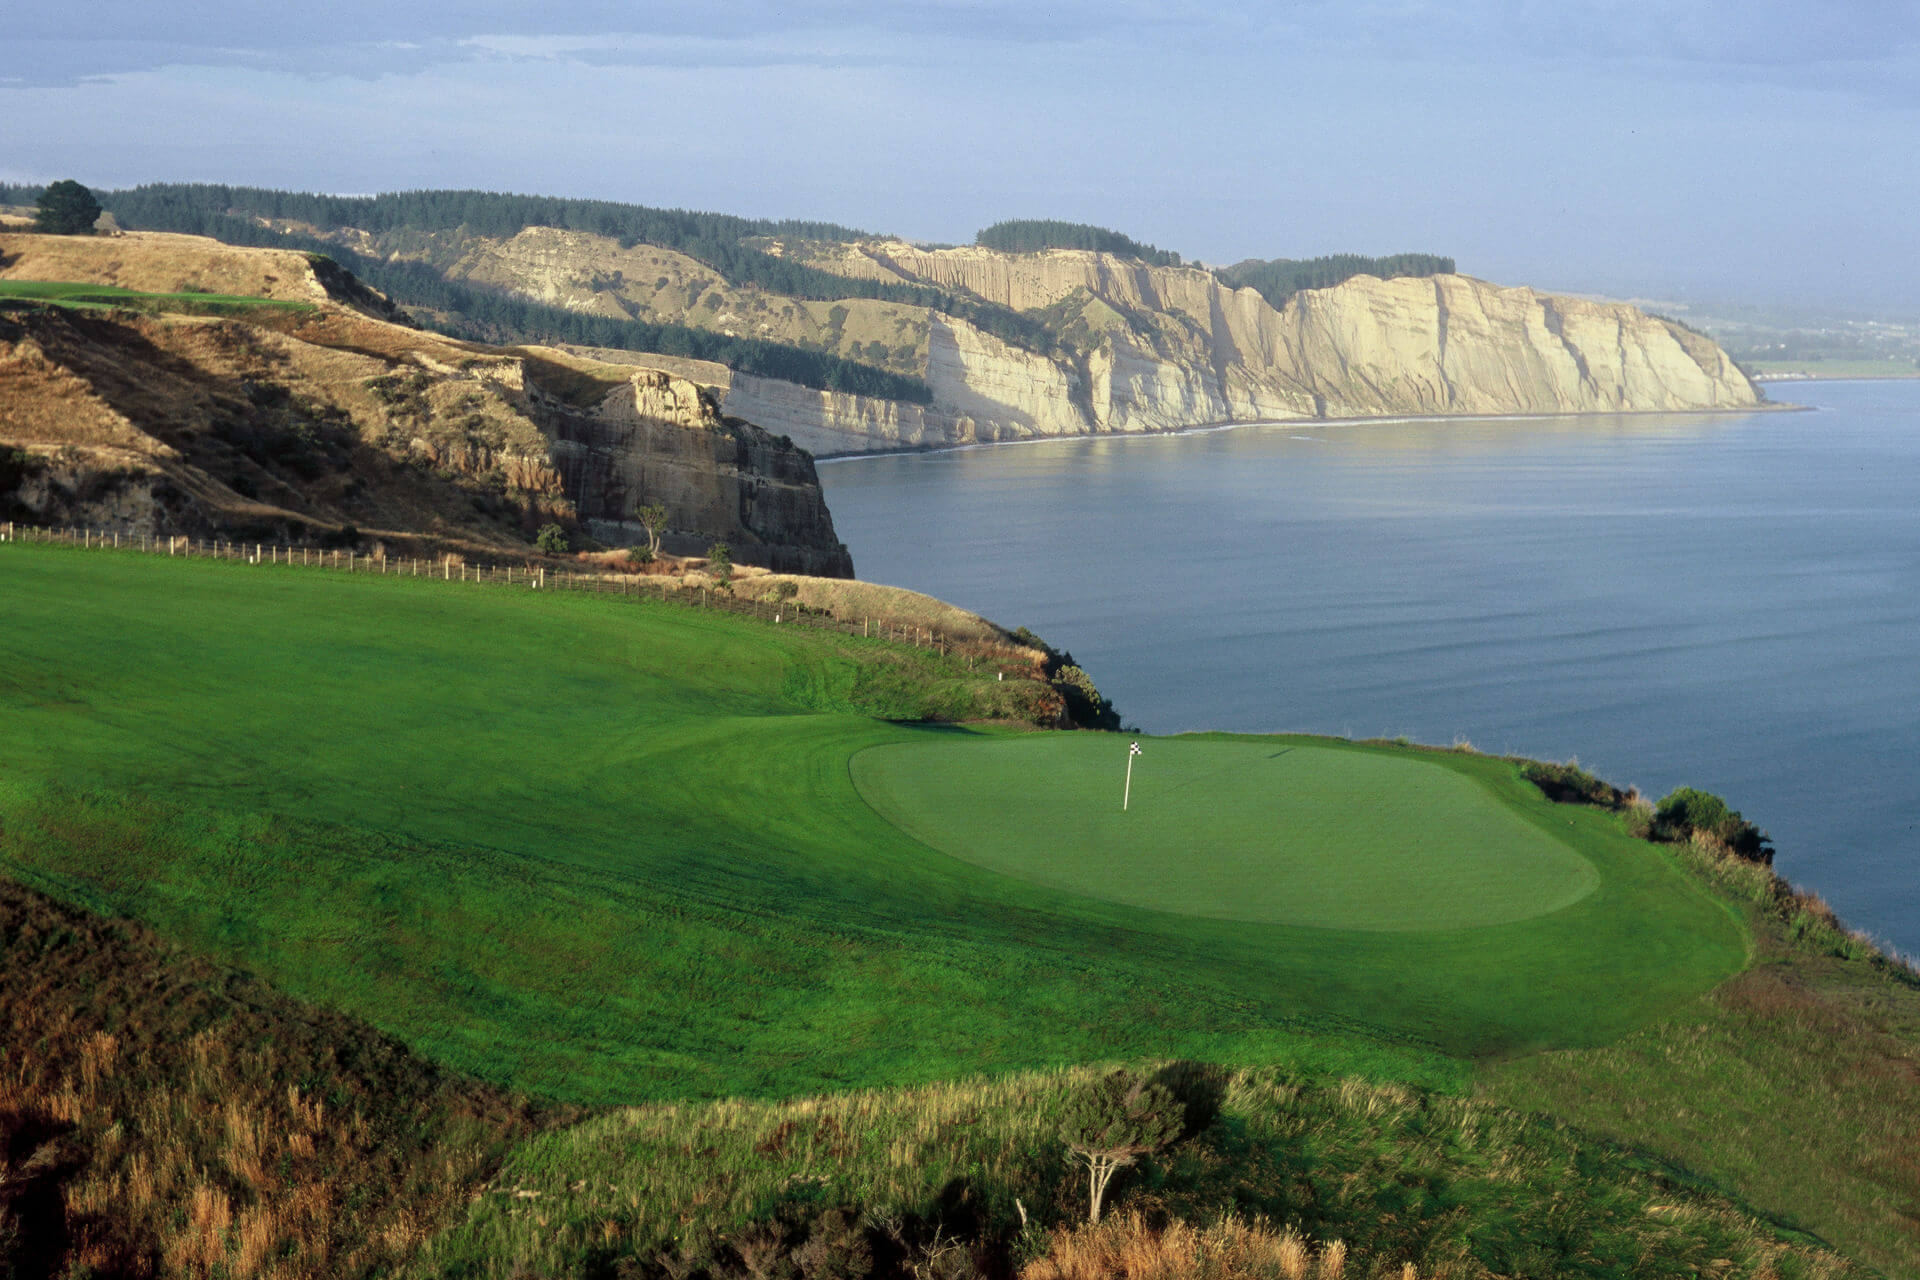 Cape kidnappers 4